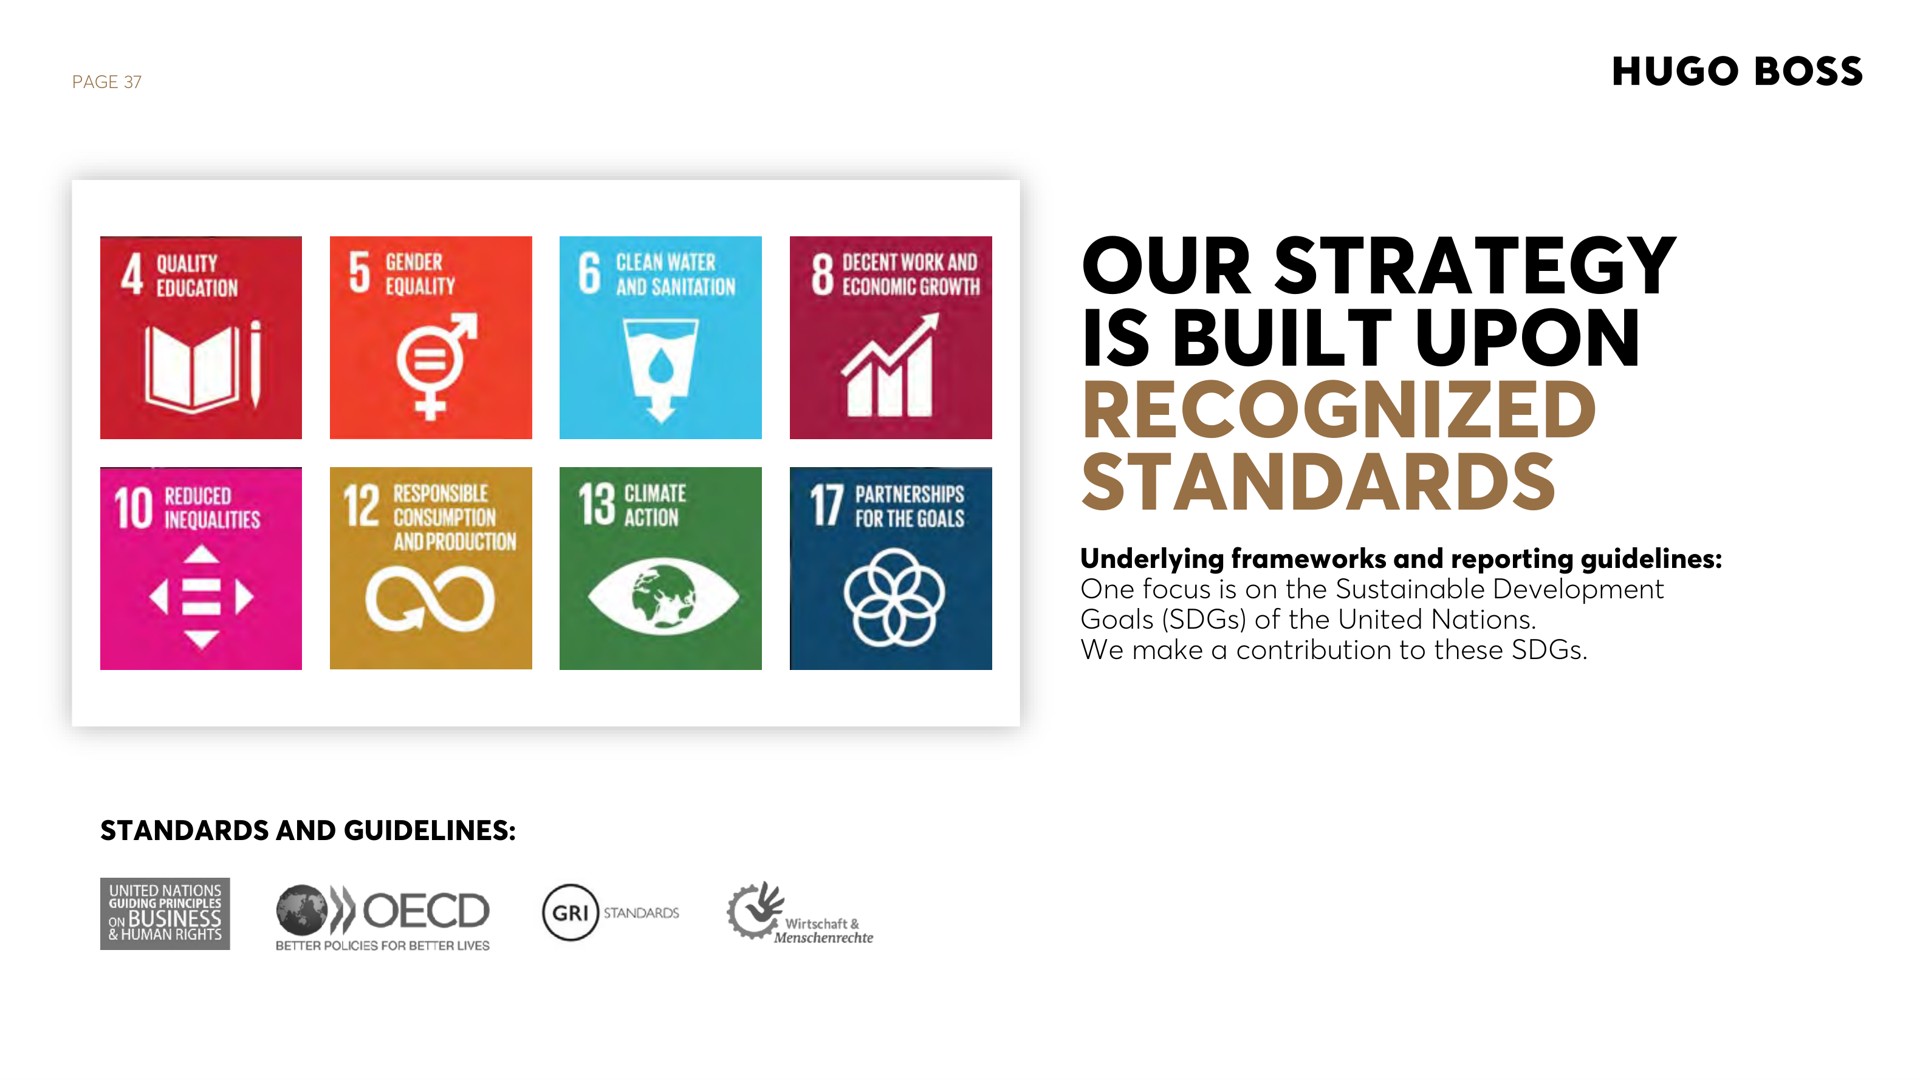 page standards and guidelines our strategy is built upon recognized standards underlying frameworks and reporting guidelines one focus is on the sustainable development goals of the united nations we make a contribution to these cay | Hugo Boss